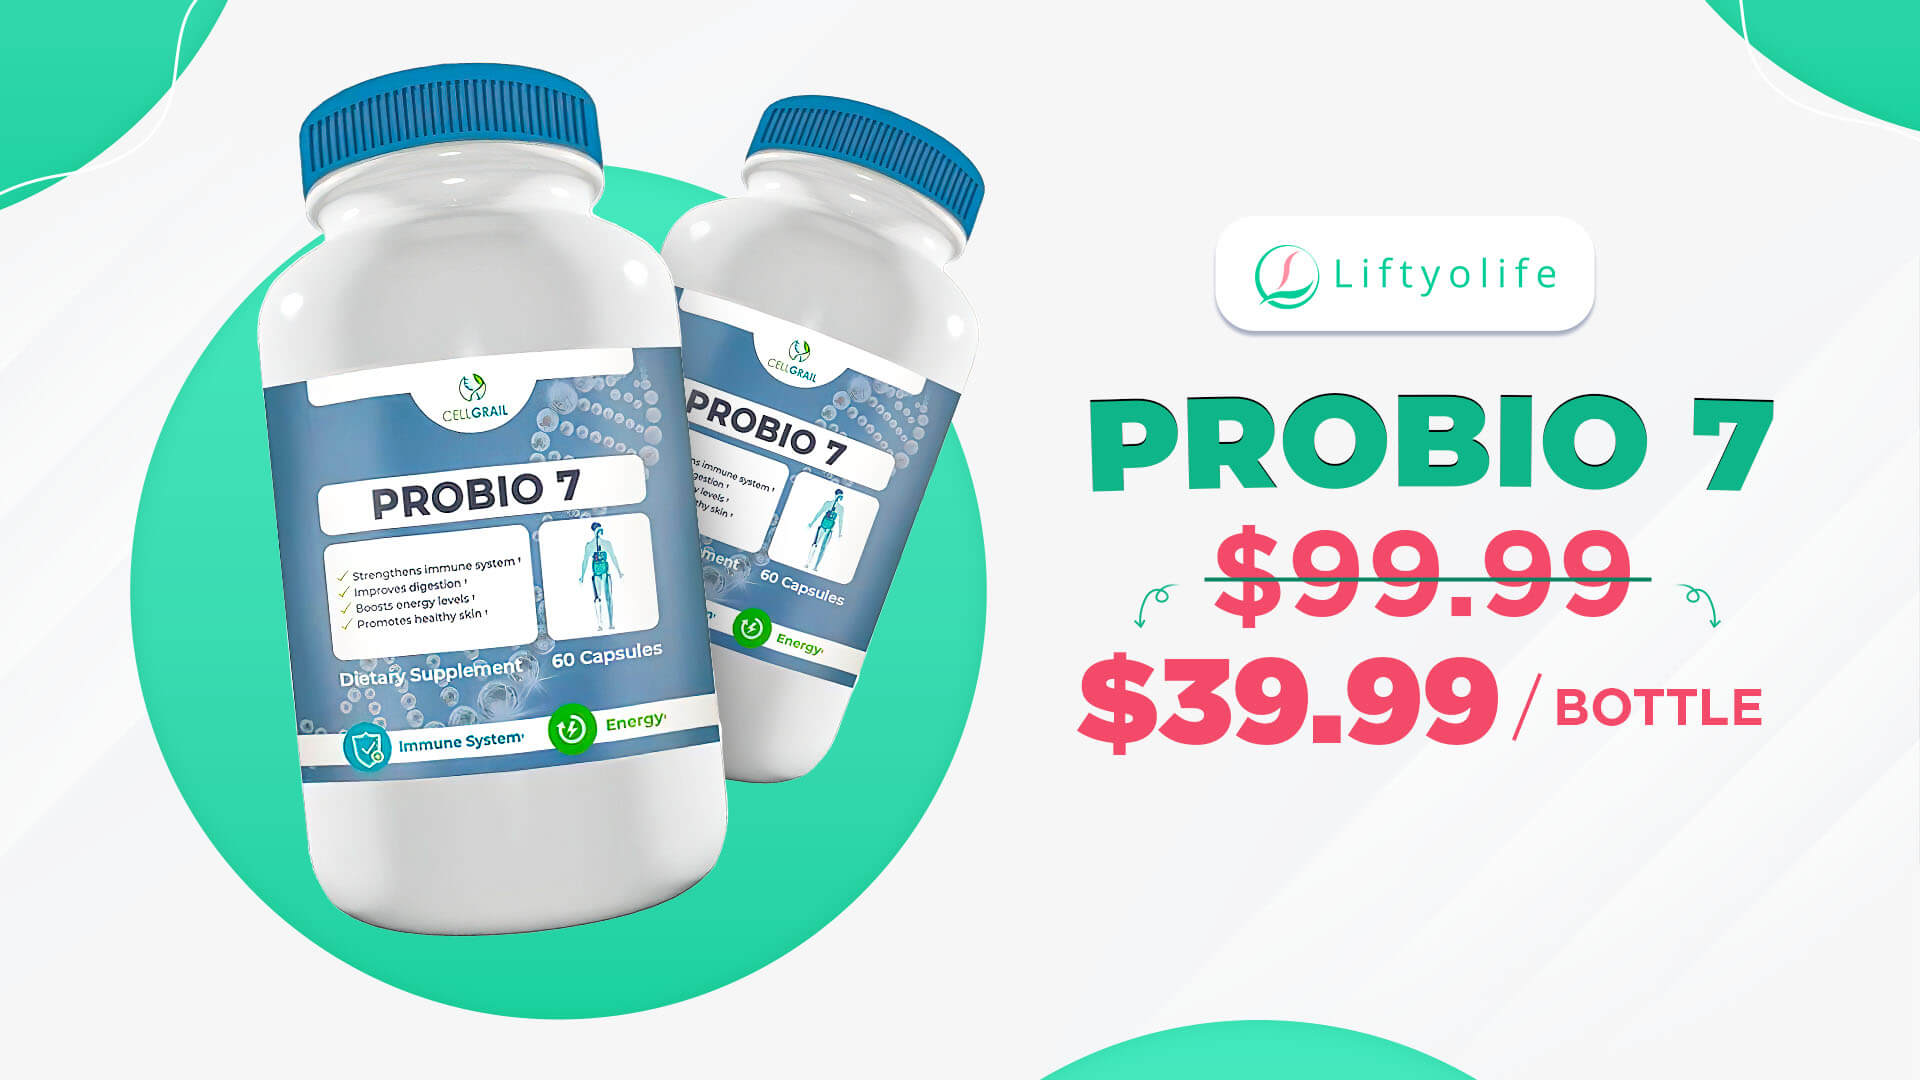 How Much Does Probio 7 Cost?